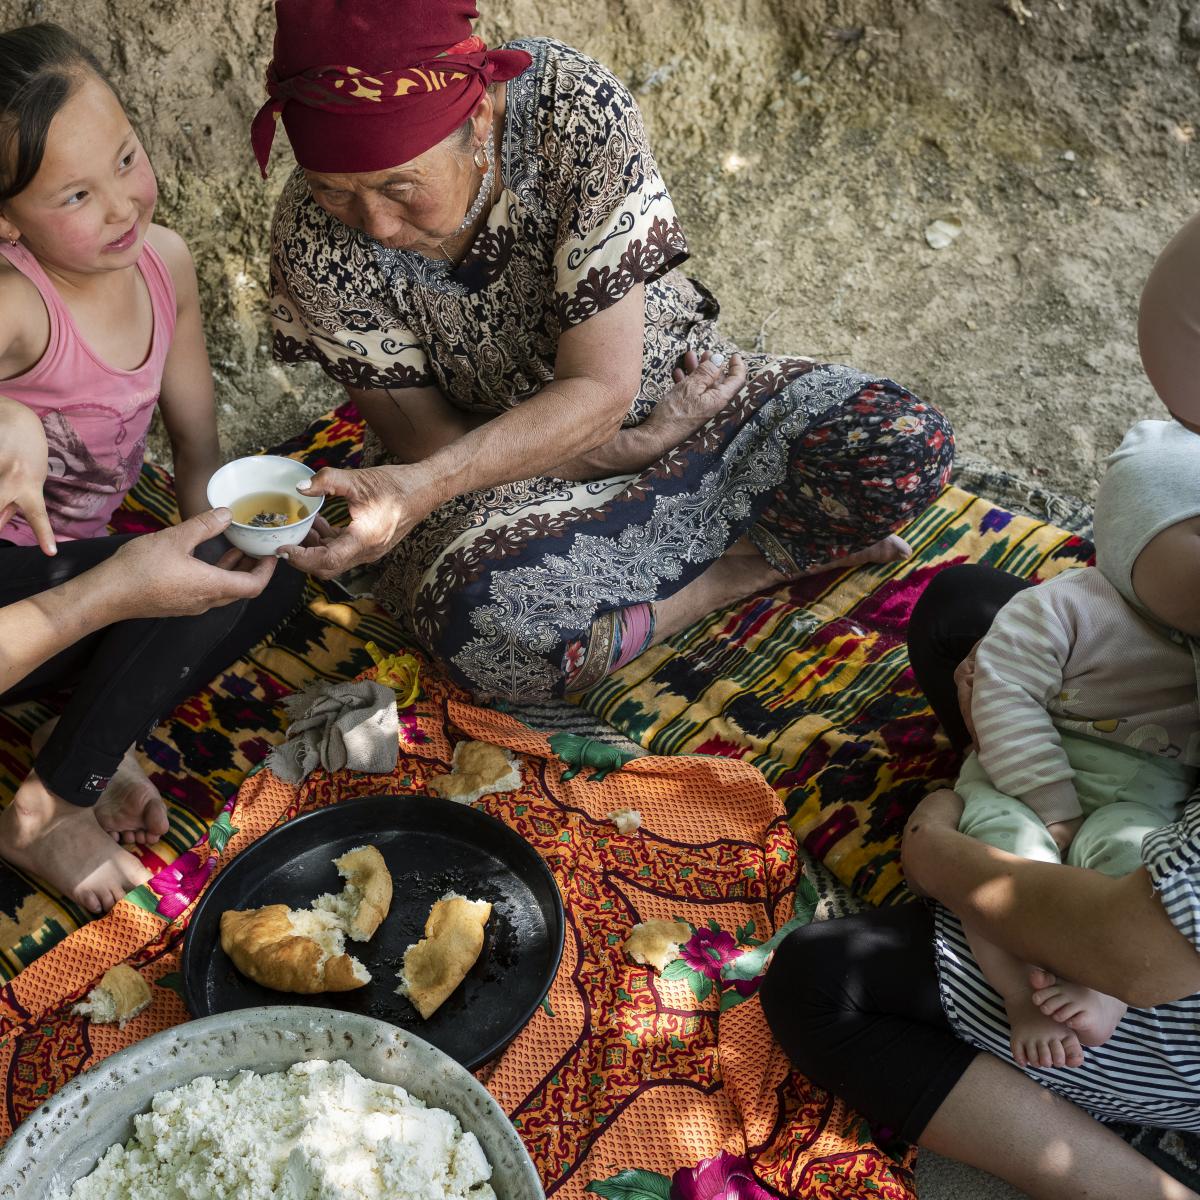 two women and two children sitting on a blanket and eating a meal